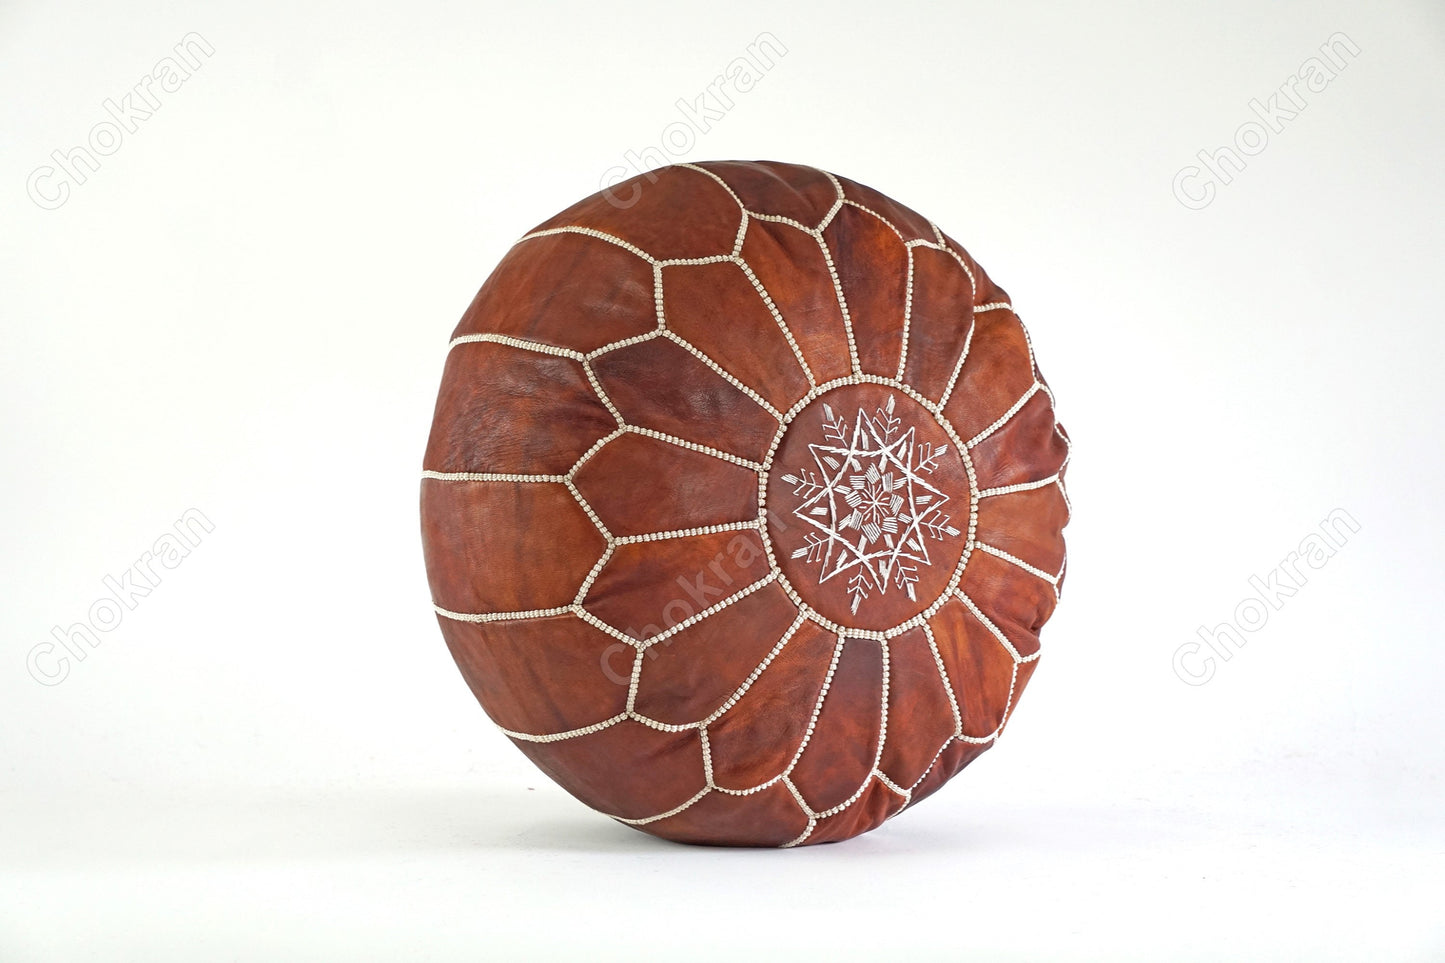 Moroccan leather pouf, round leather ottoman, handmade leather pouf, Moroccan genuine leather footstool- Dark brown -UNSTUFFED